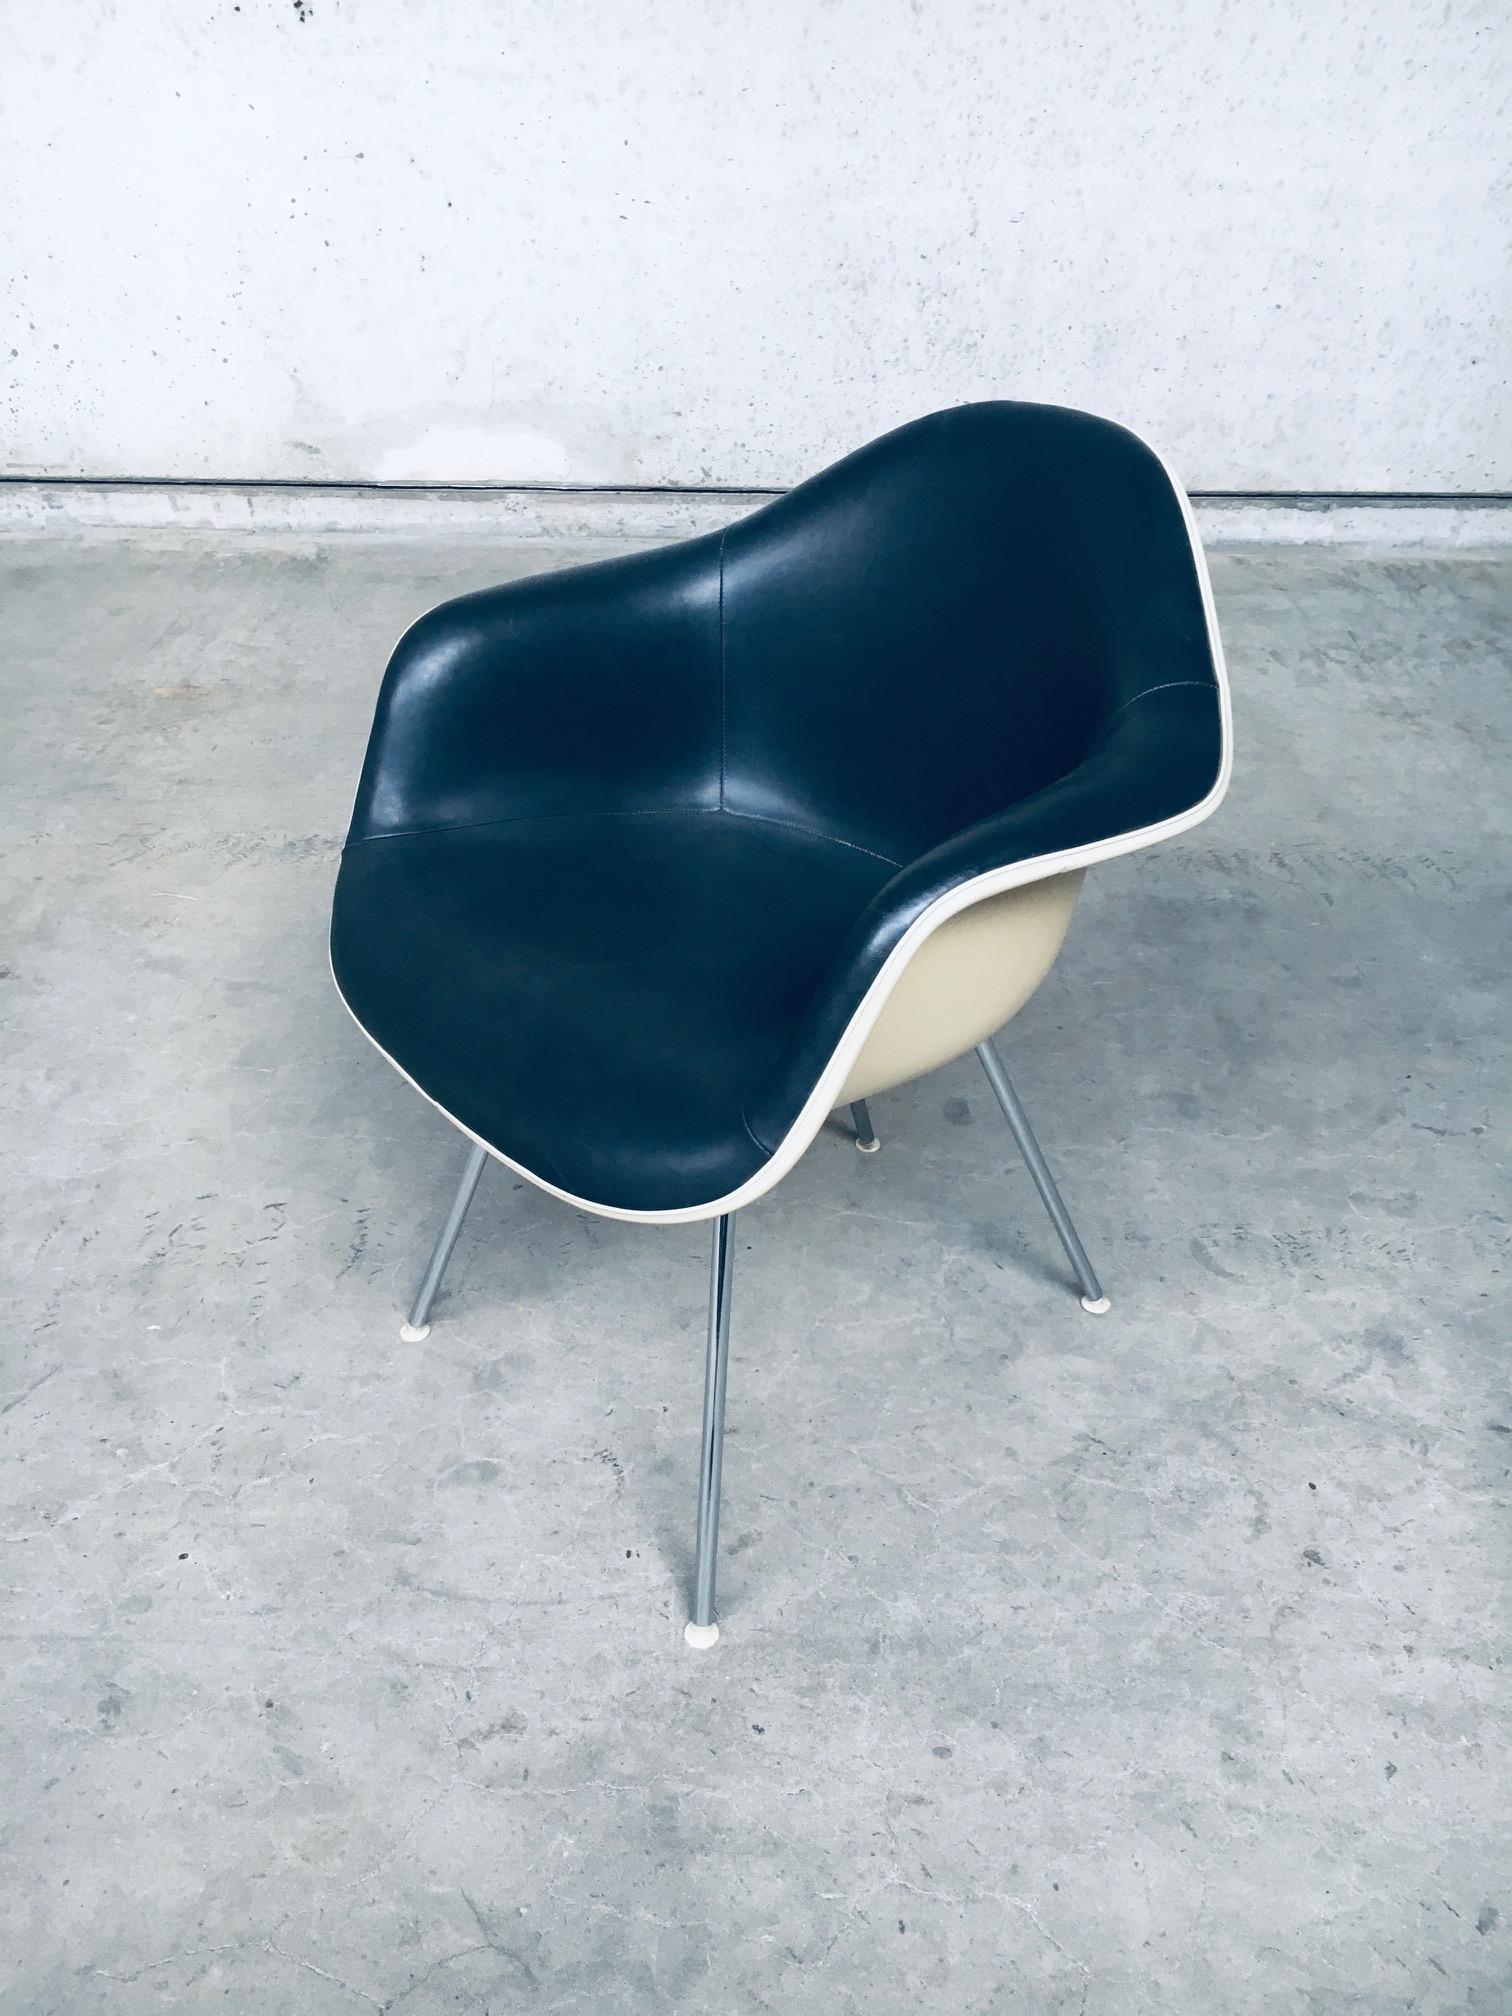 American Mid-Century Black Leather Dax Armchair by Charles & Ray Eames for Herman Miller For Sale